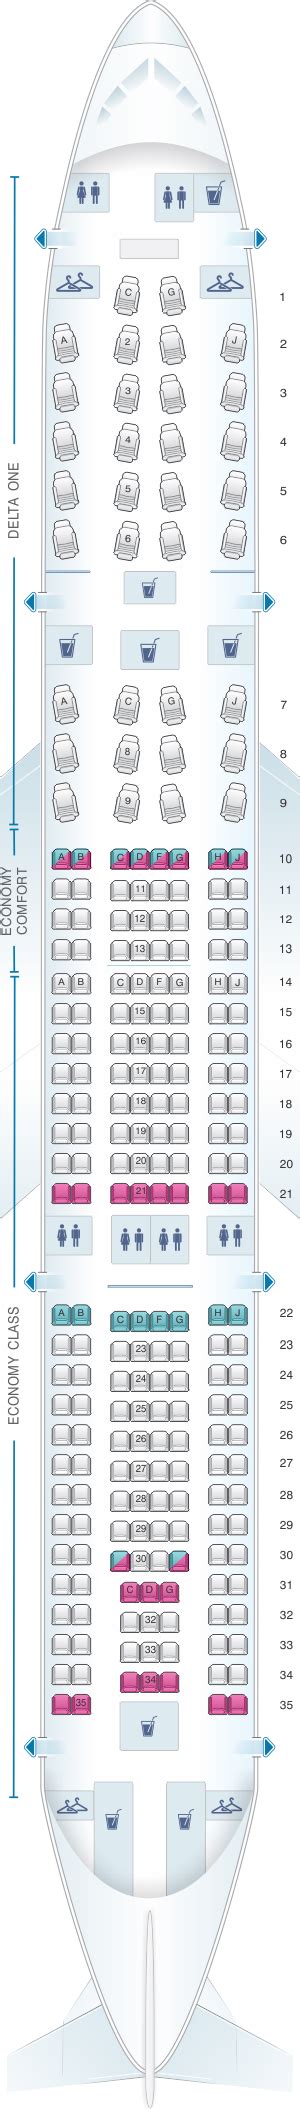 Delta Airbus A330 300 Seat Chart